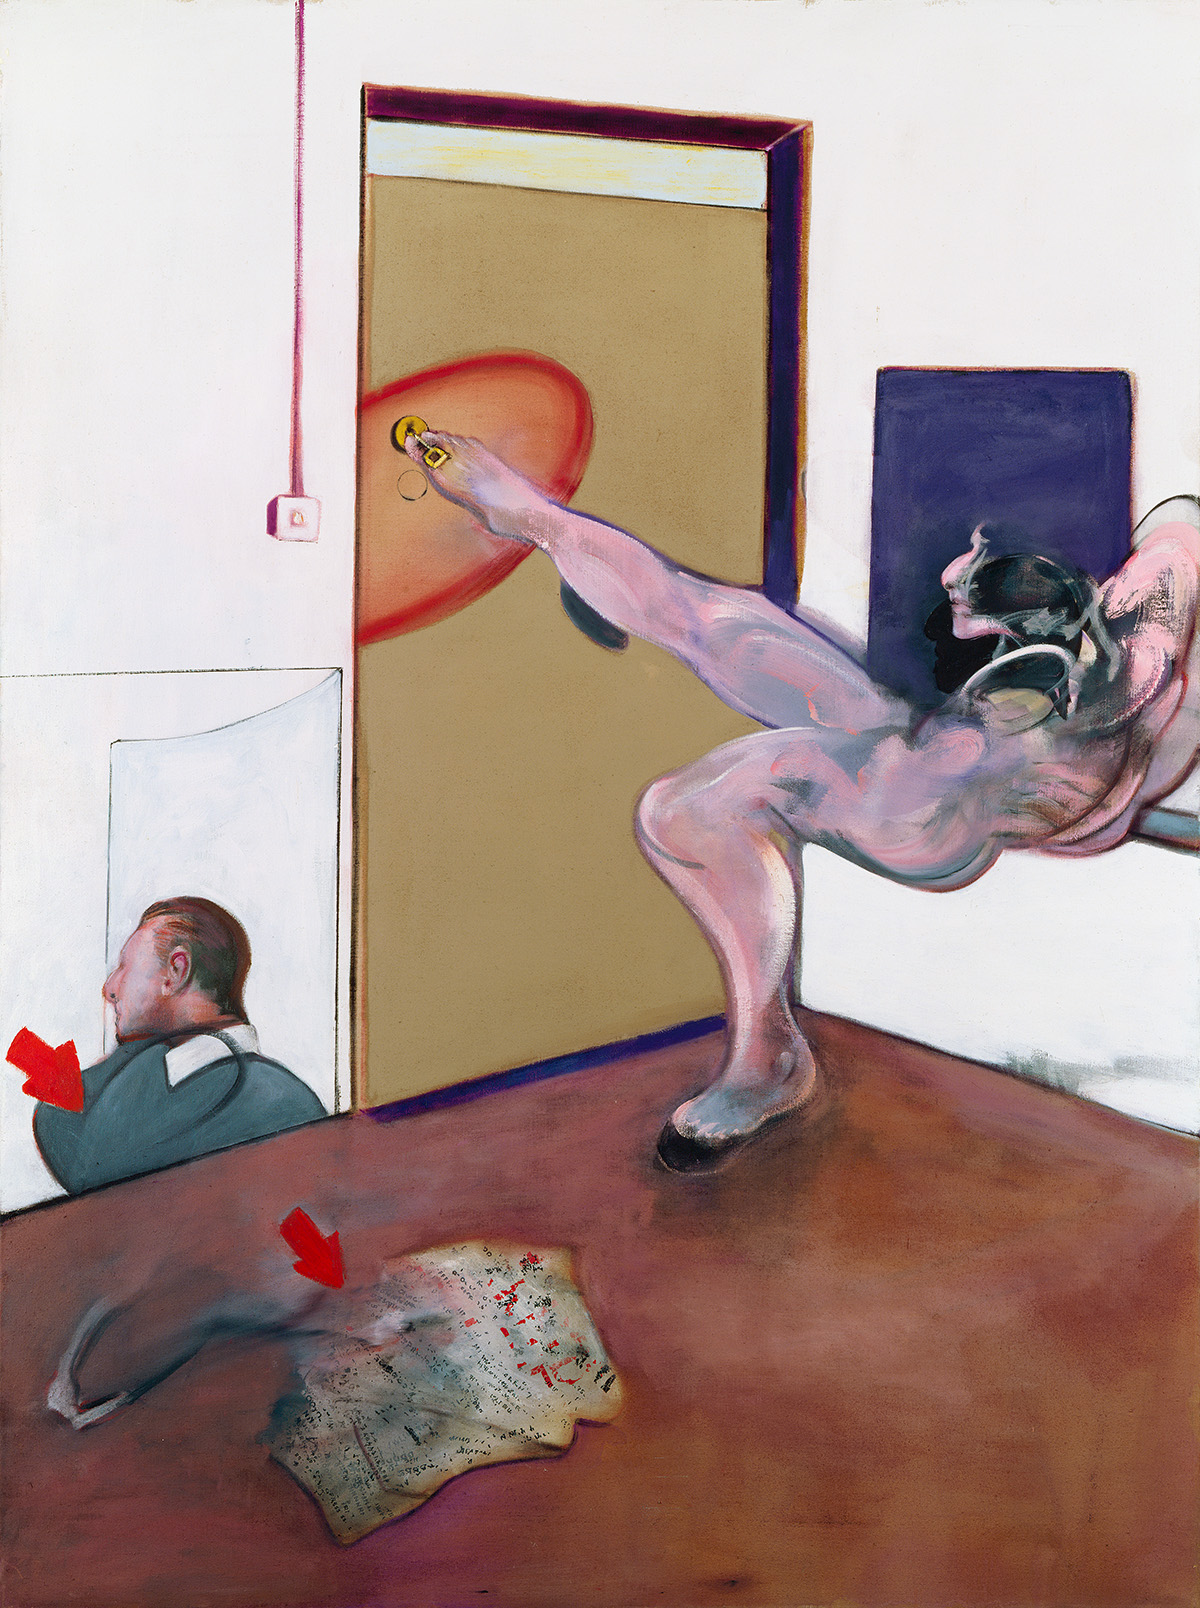 Painting, 1978. Oil on canvas. CR no. 78-01. © The Estate of Francis Bacon / DACS London 2022. All rights reserved.